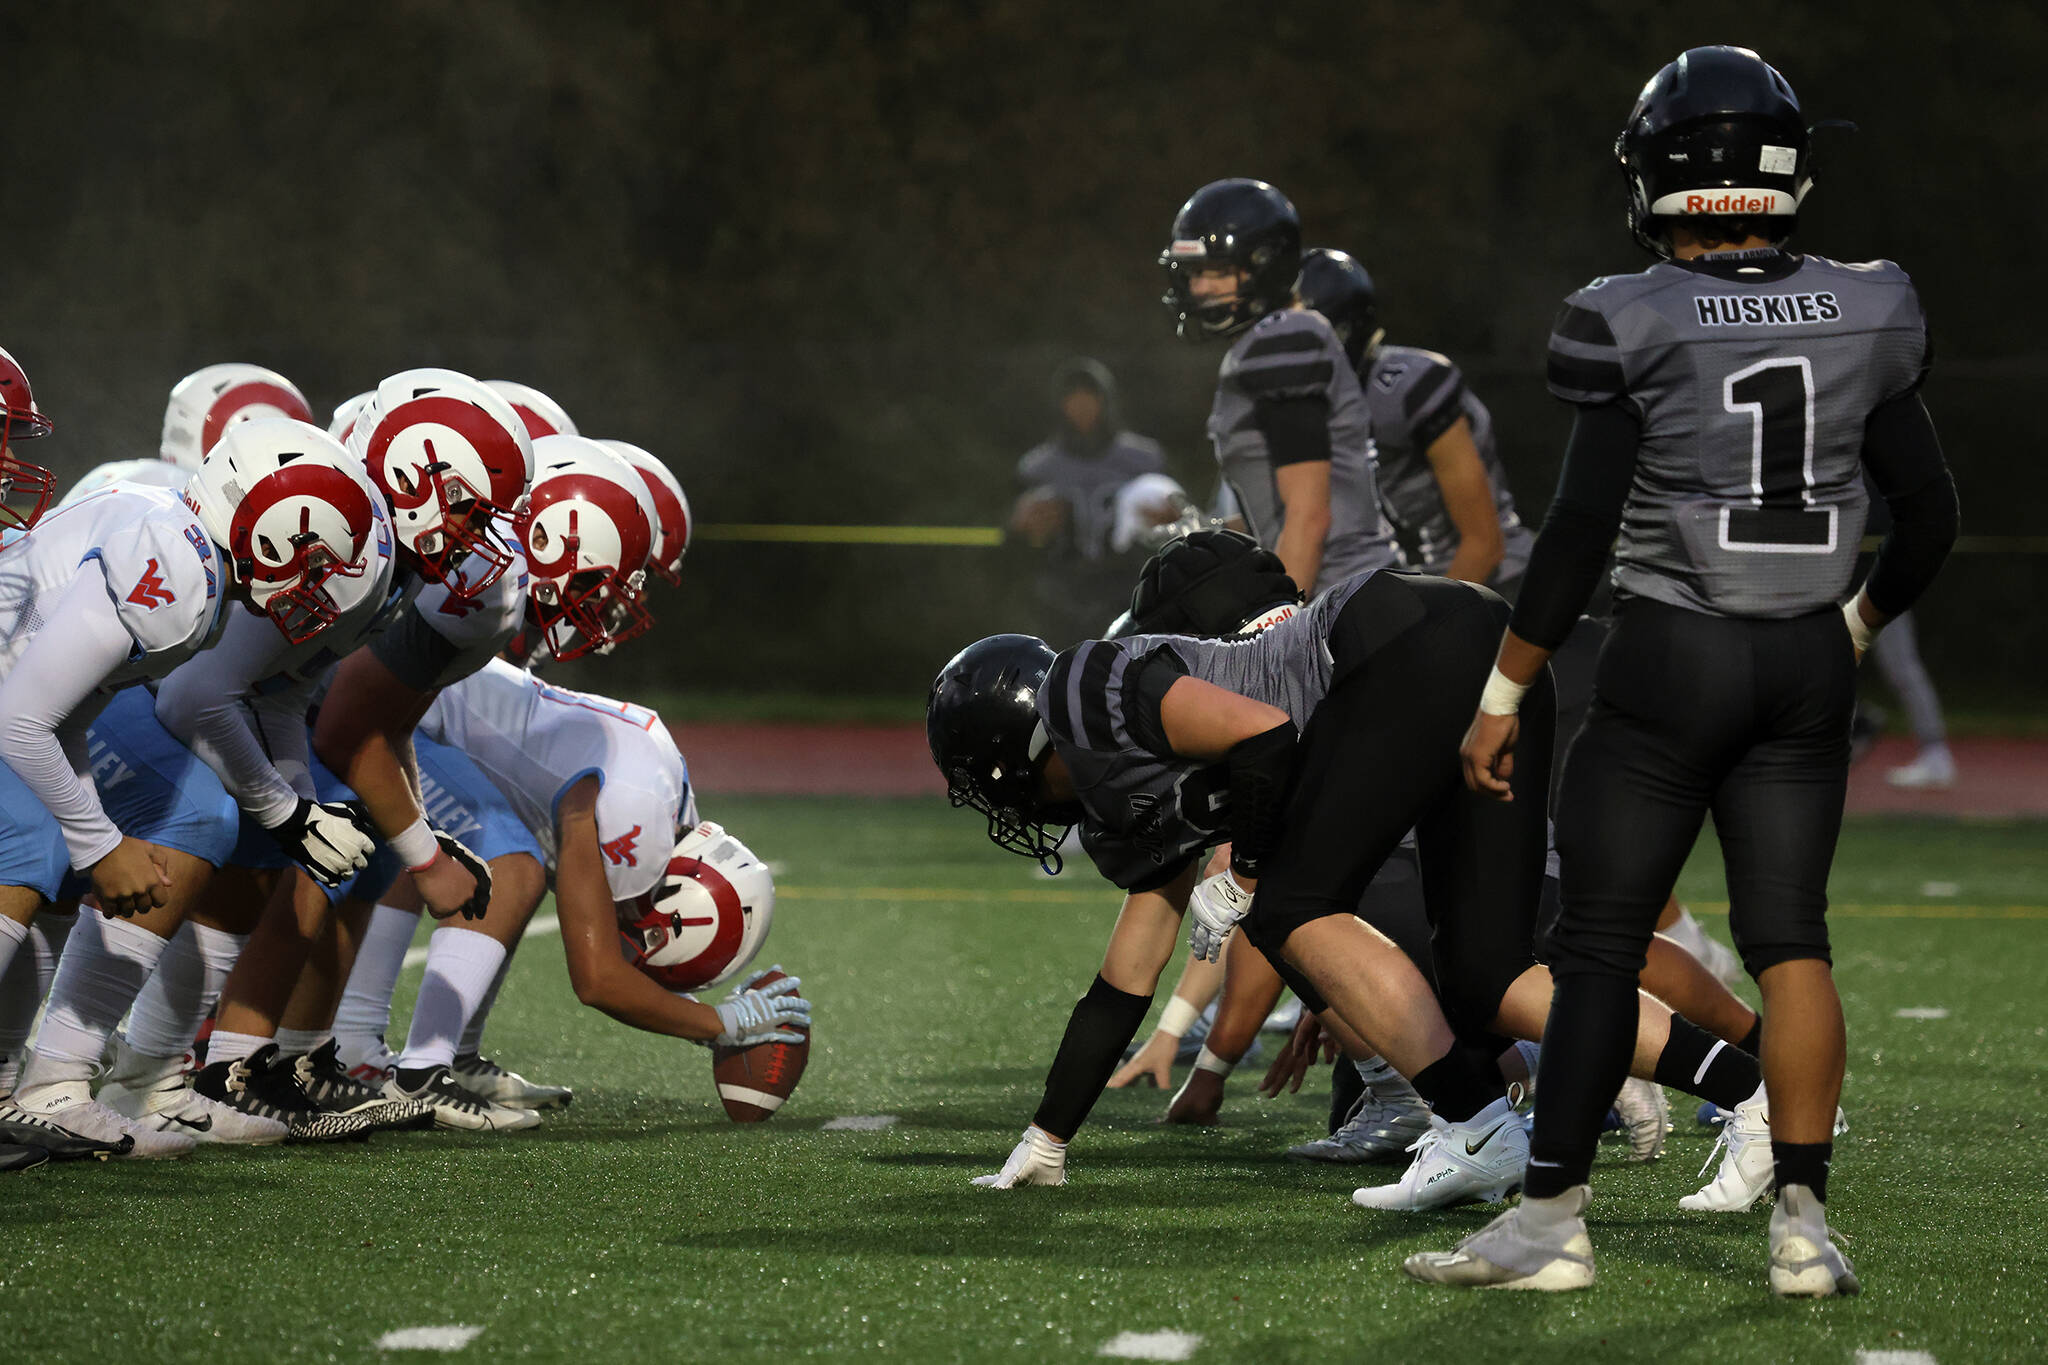 Juneau’s defense lines up against the visiting West Valley High School Rams from Washington state. The Huskies prevailed in their lone out-of-conference match-up.